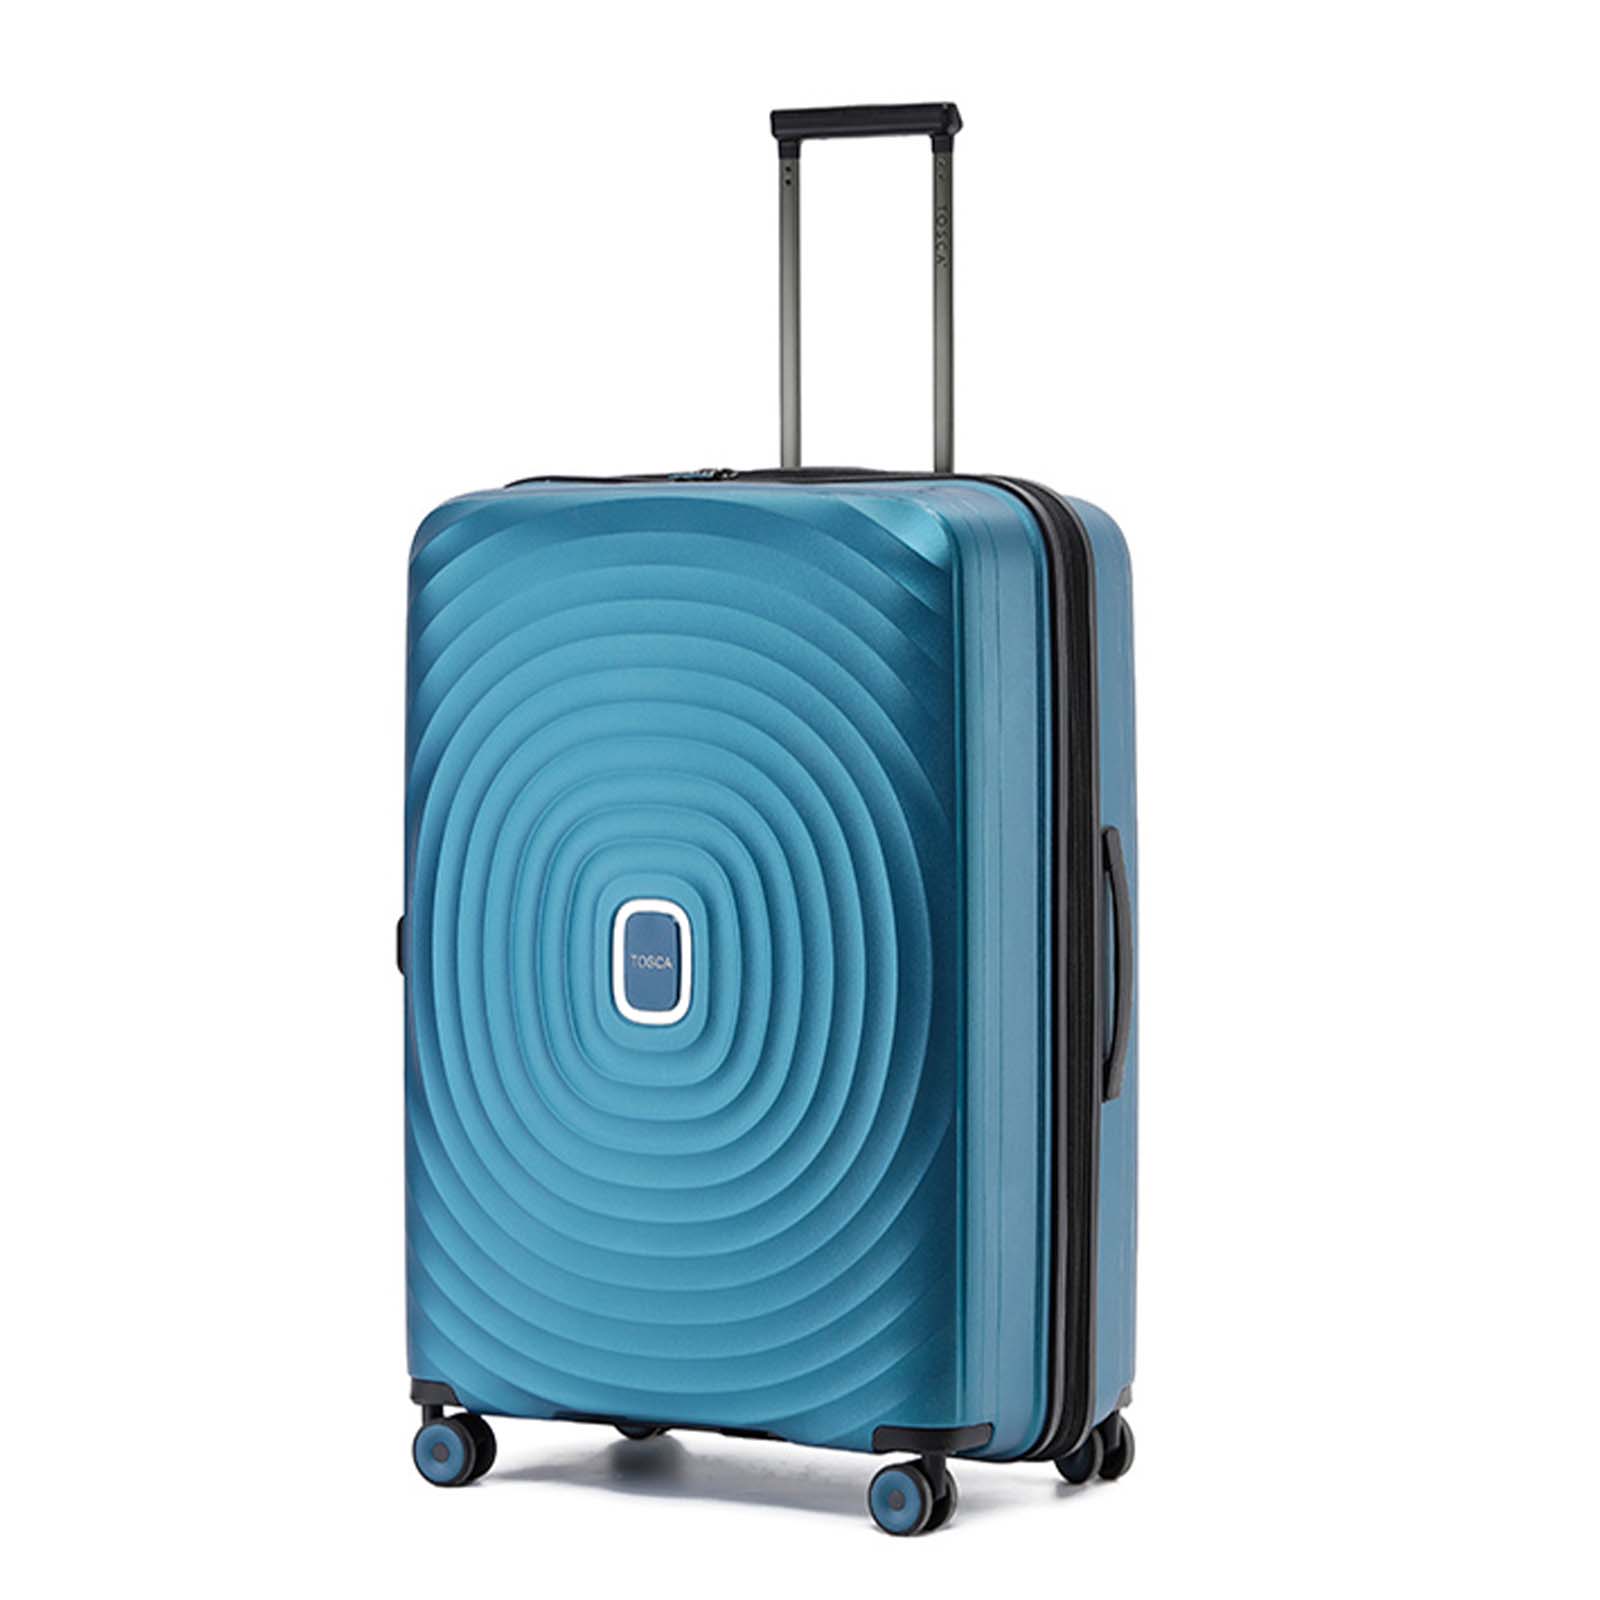 tosca-eclipse-4-wheel-77cm-large-suitcase-blue-front-angle